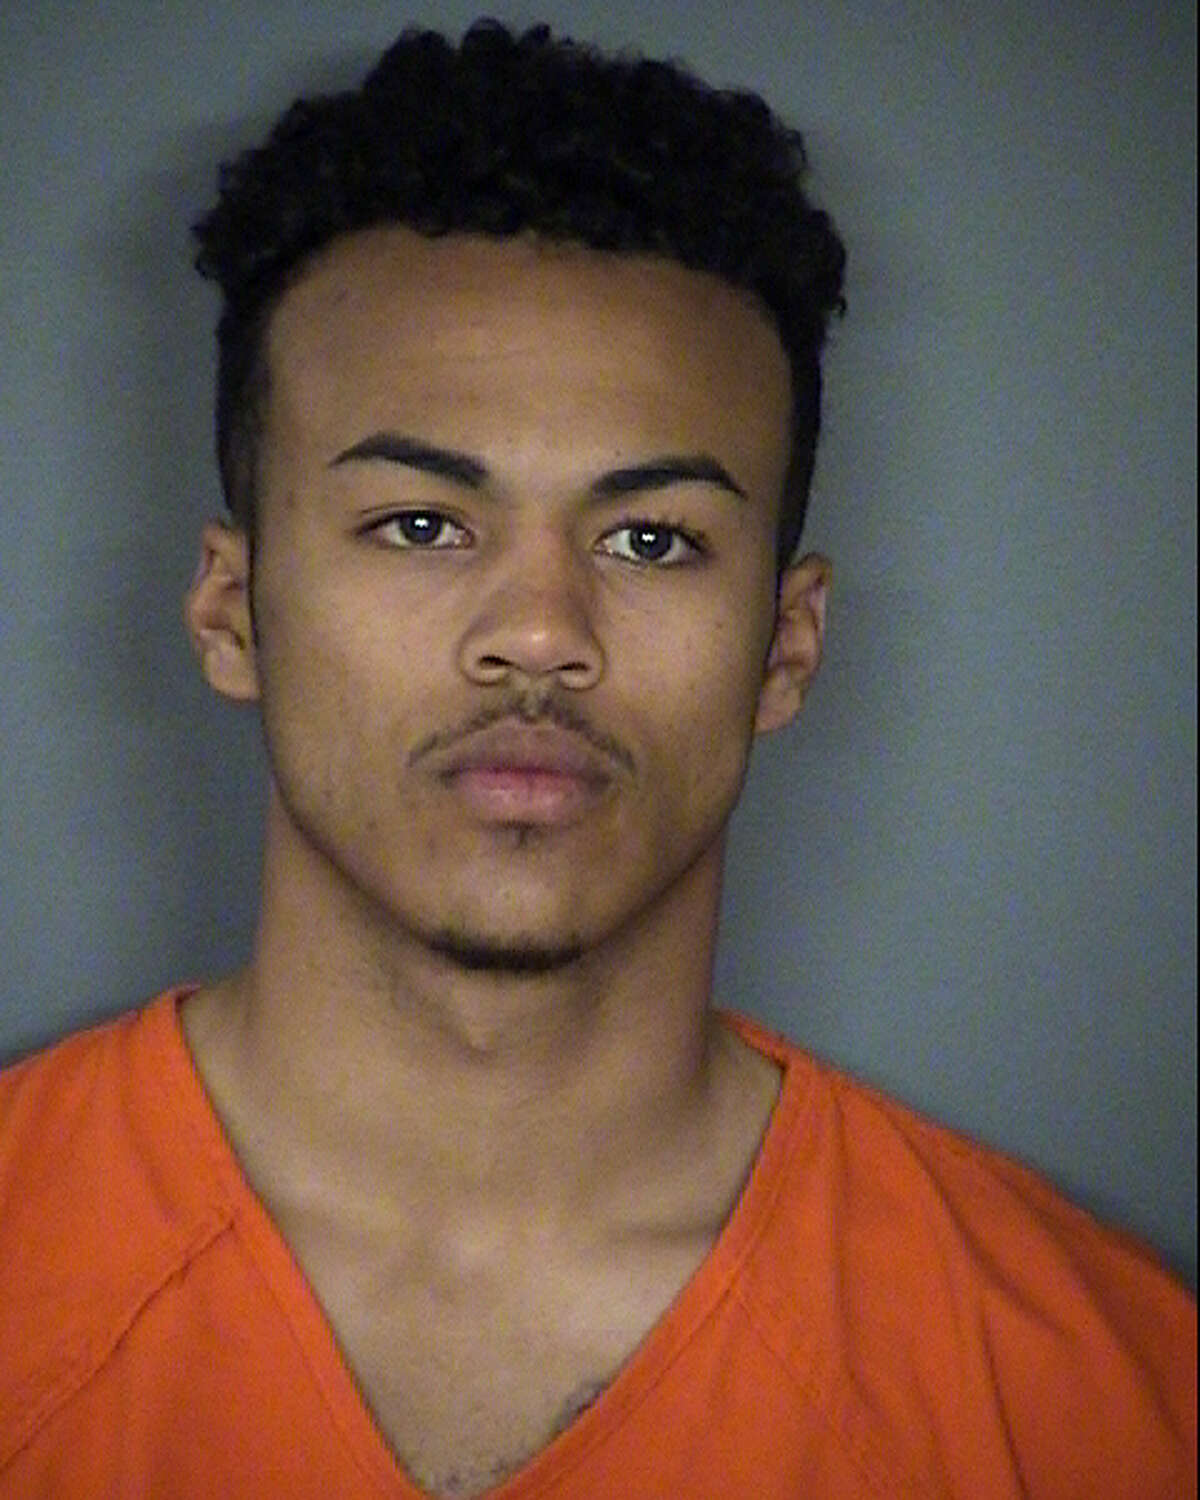 Tore Shammond Barrera, 18, was arrested Jan. 29, 2017, on first-degree felony charges of aggravated kidnapping and aggravated robbery, said BCSO spokeswoman Rosanne Hughes.